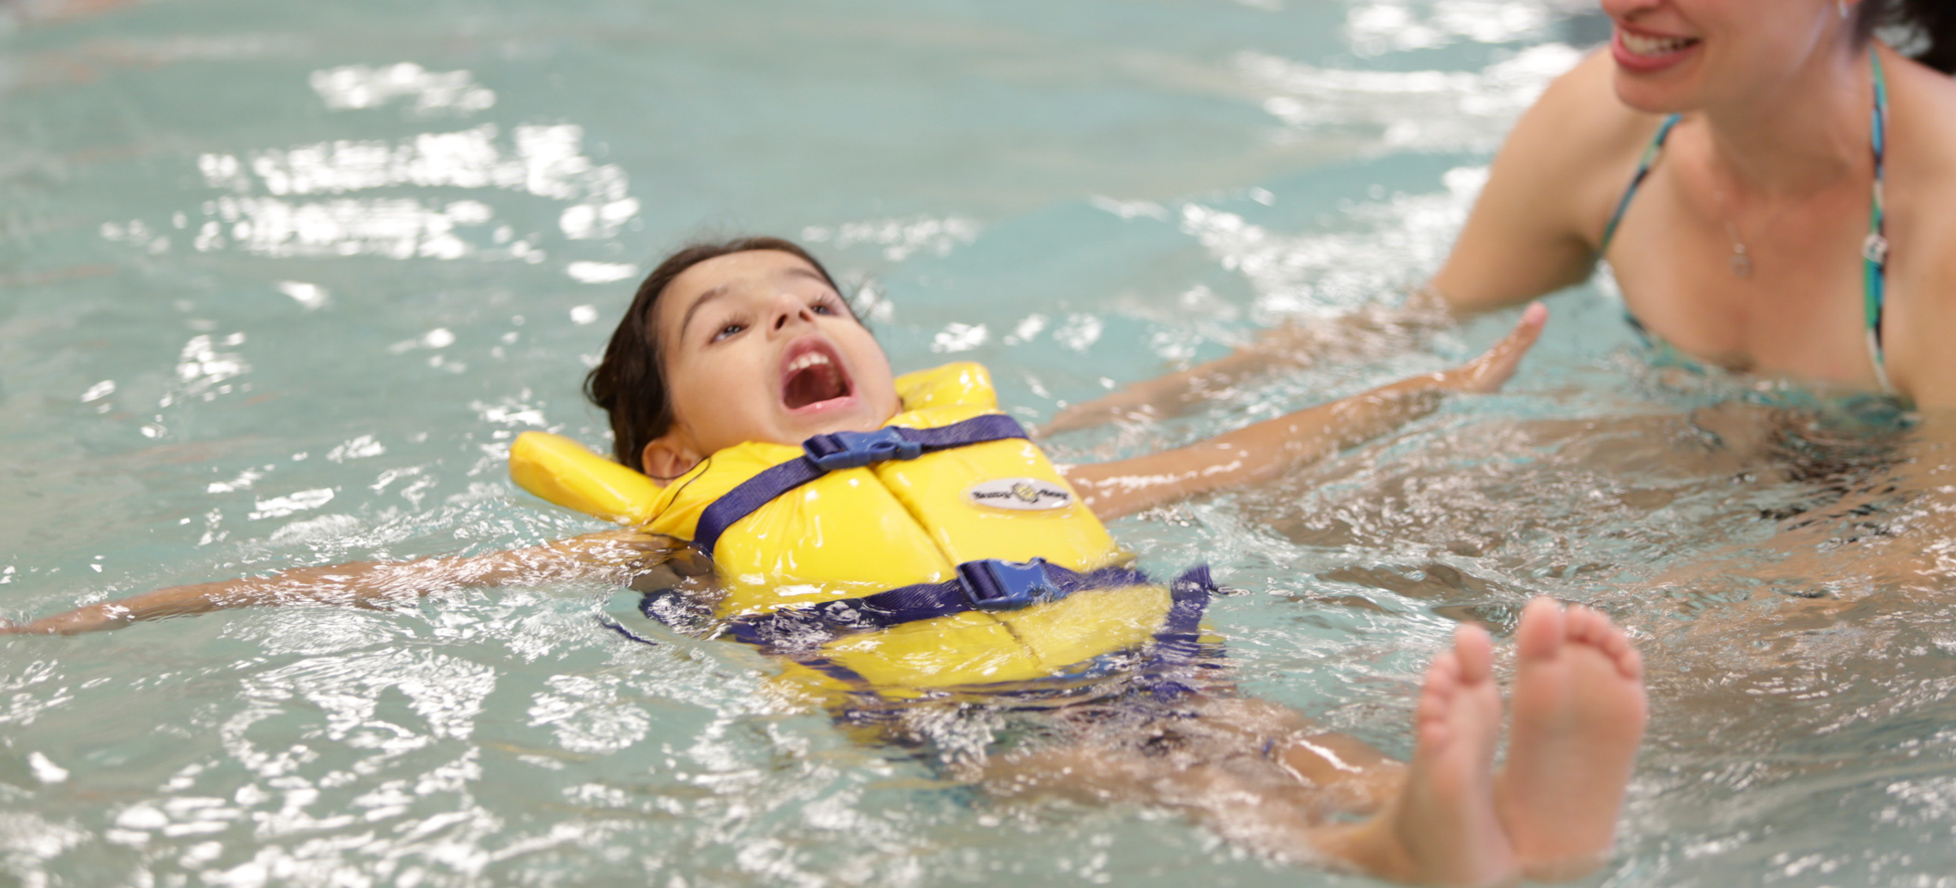 Little girl doing a backfloat in a pool with life jacket on